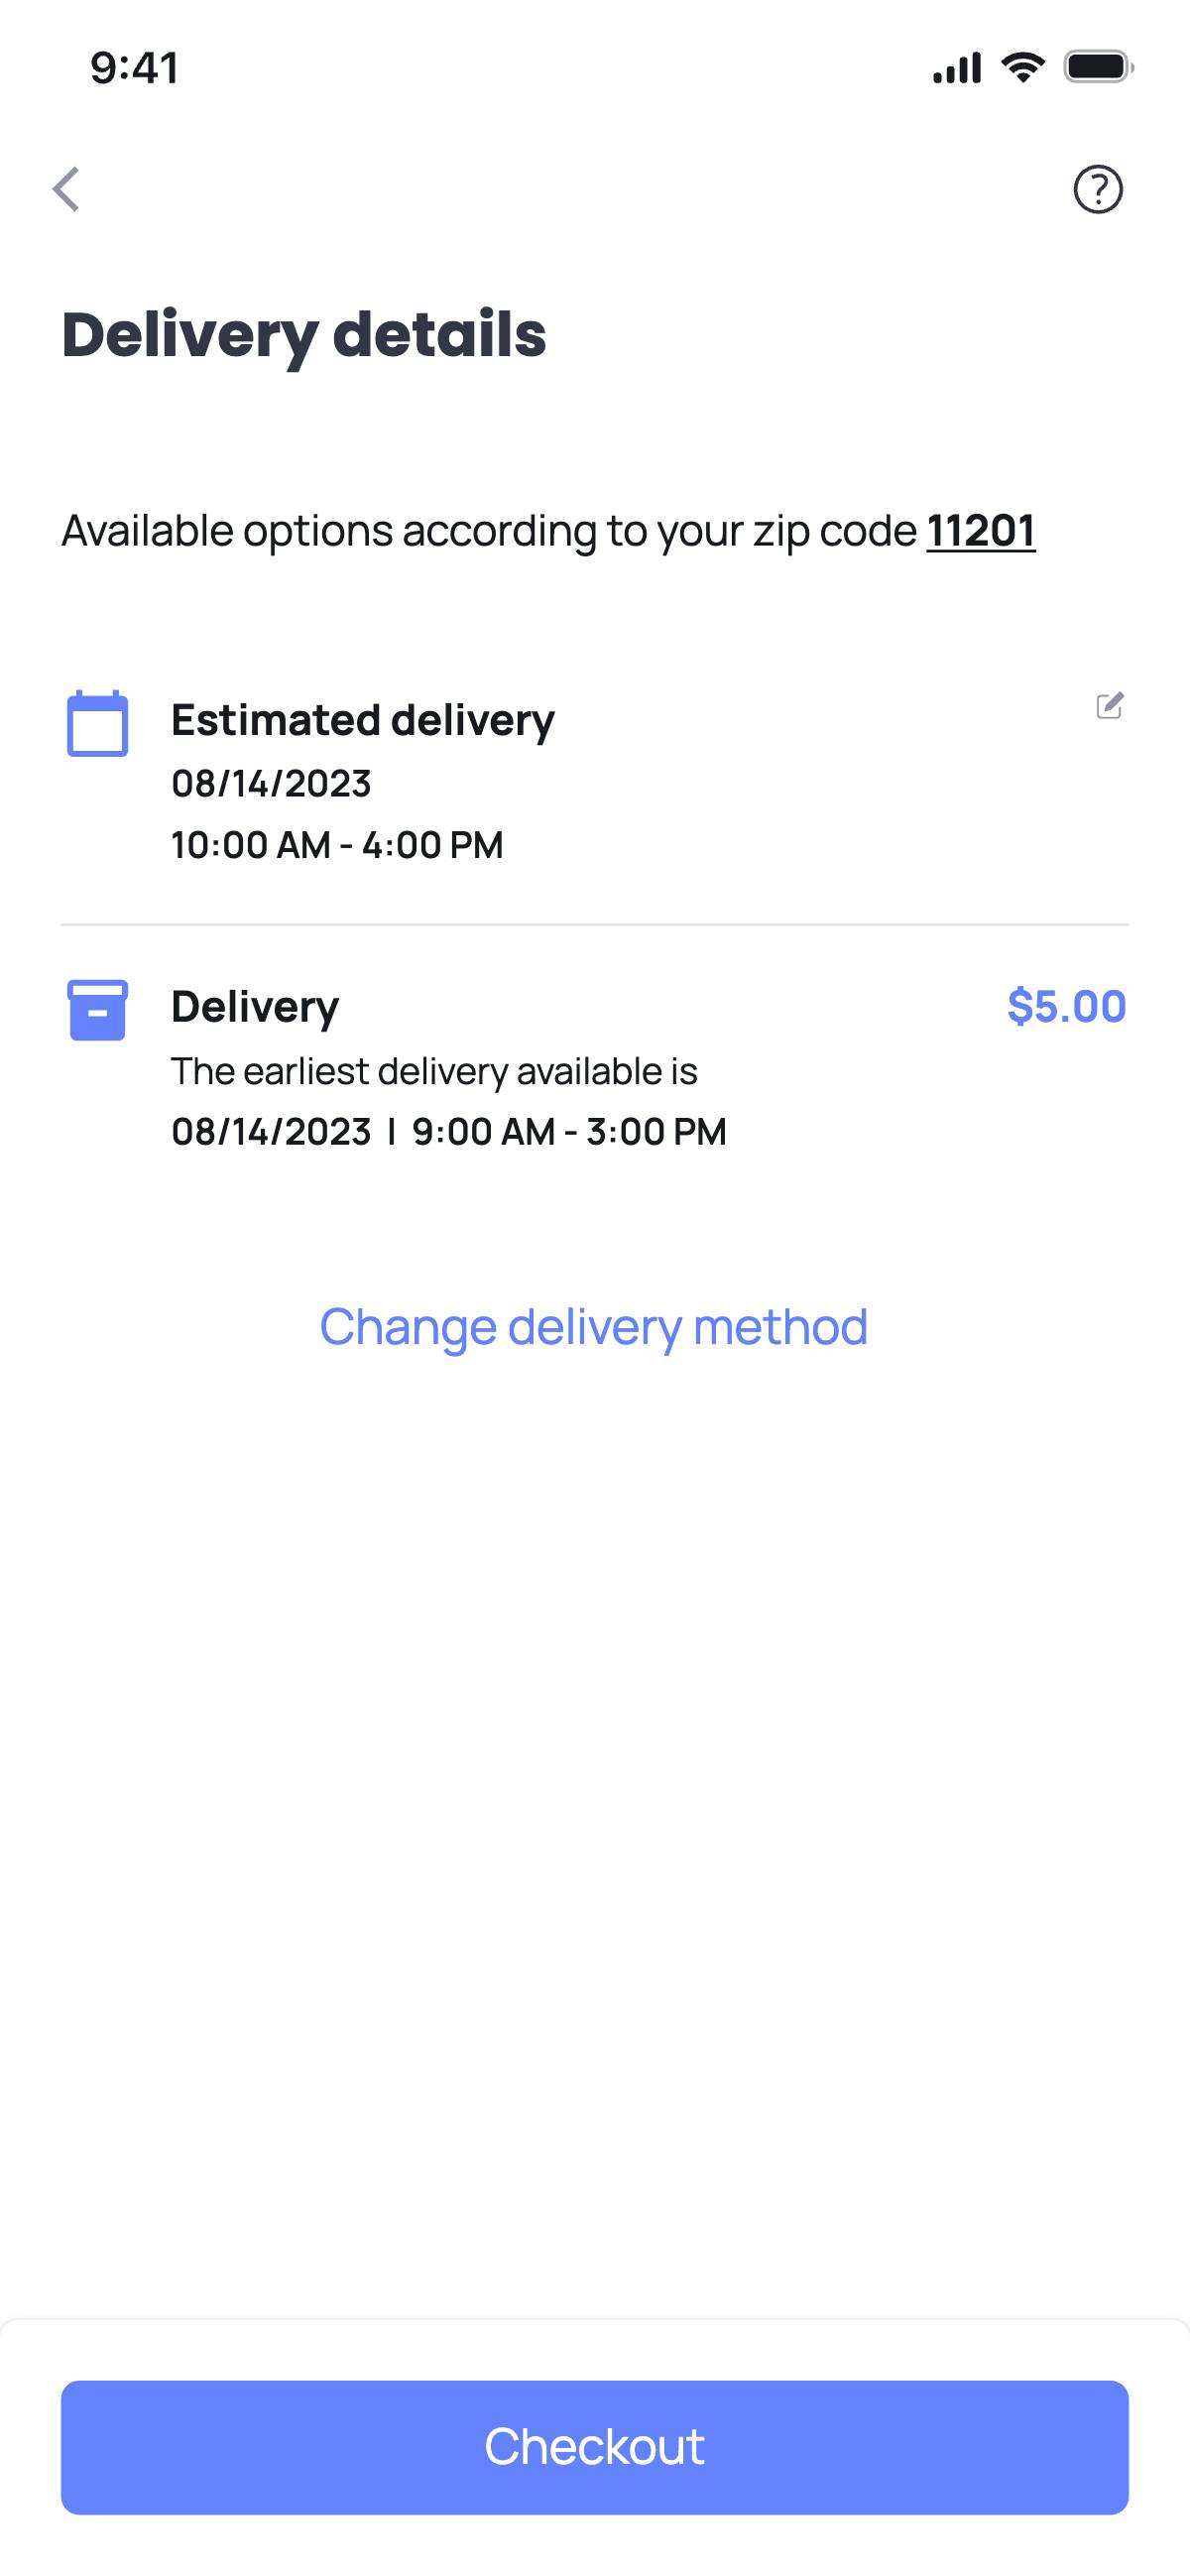 Checkout - Delivery details